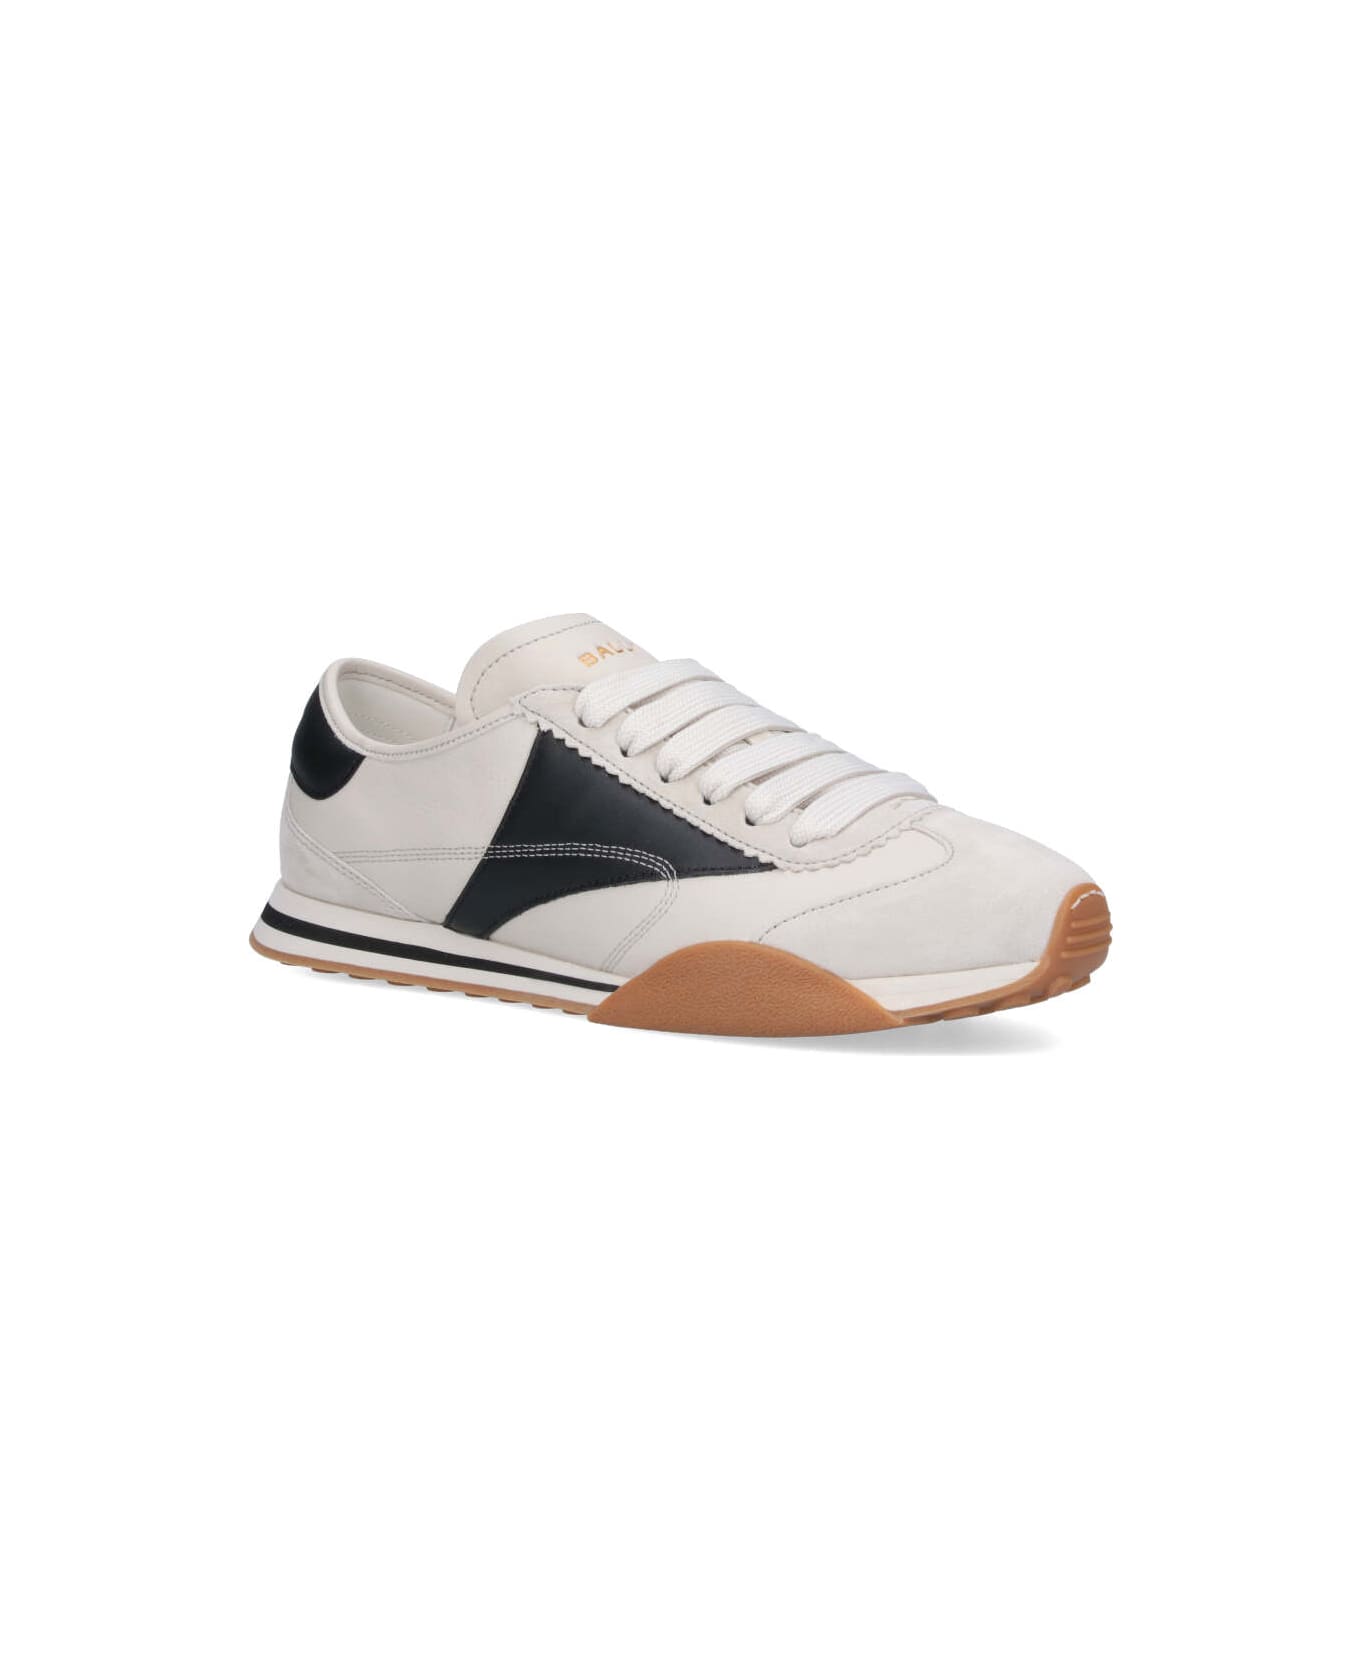 Bally "sussex" Sneakers - Crema